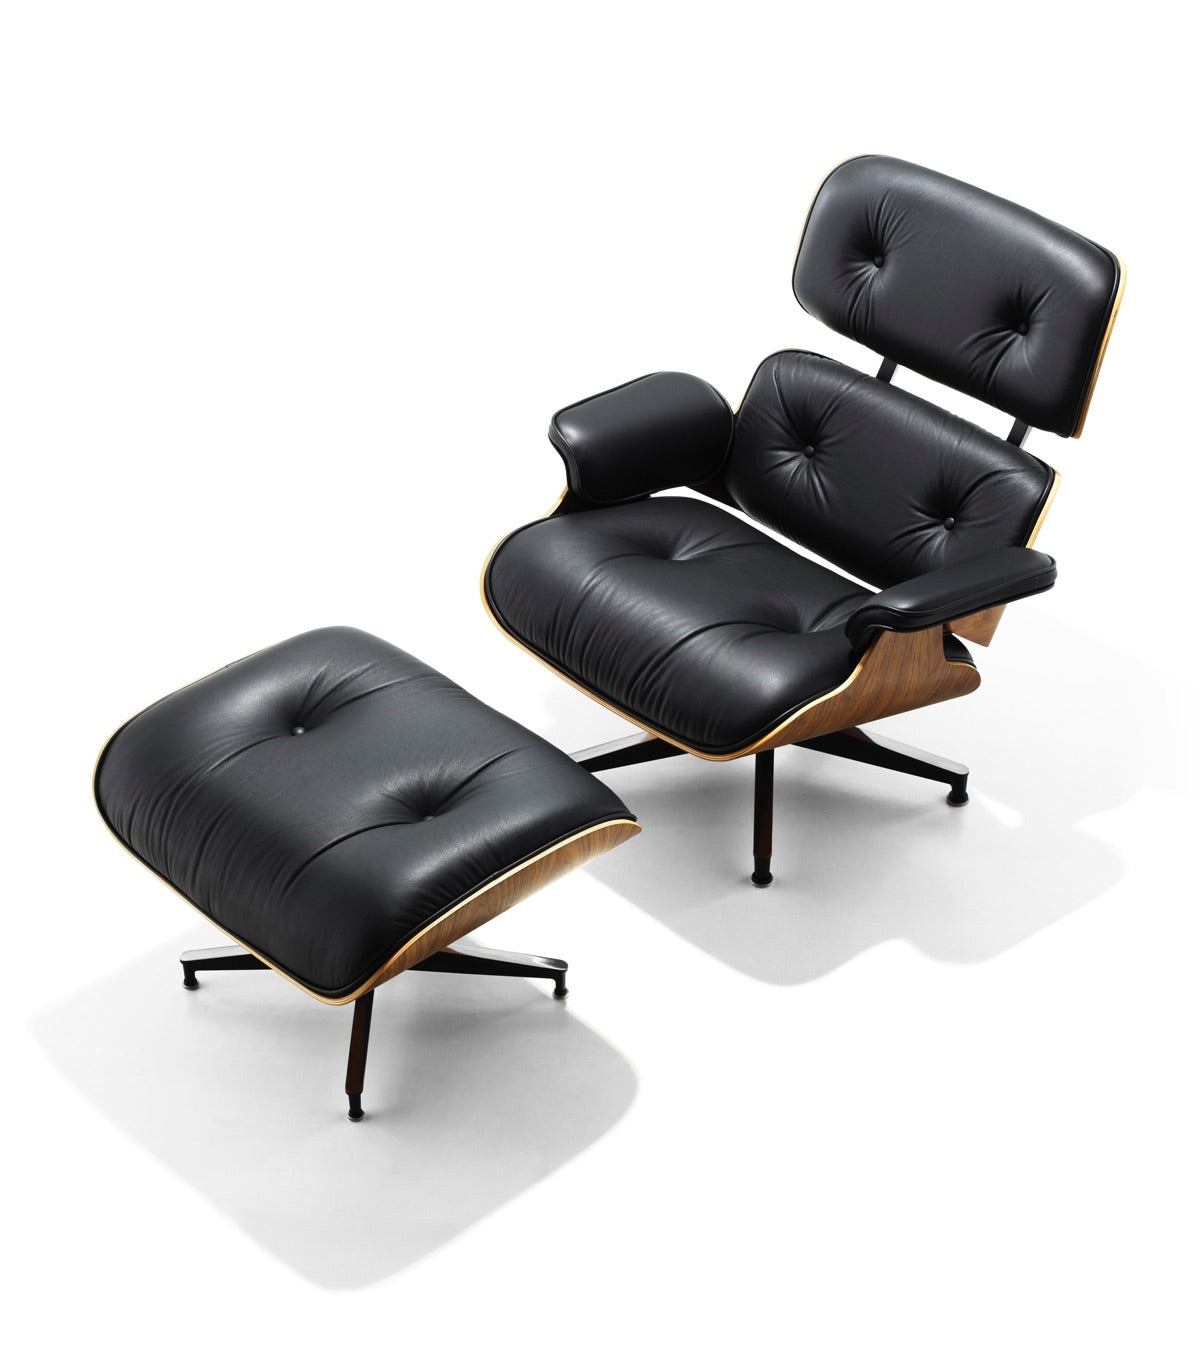 Eames Lounge Chair and イームズラウンジチェア＆オットマン – THE CHAIR SHOP